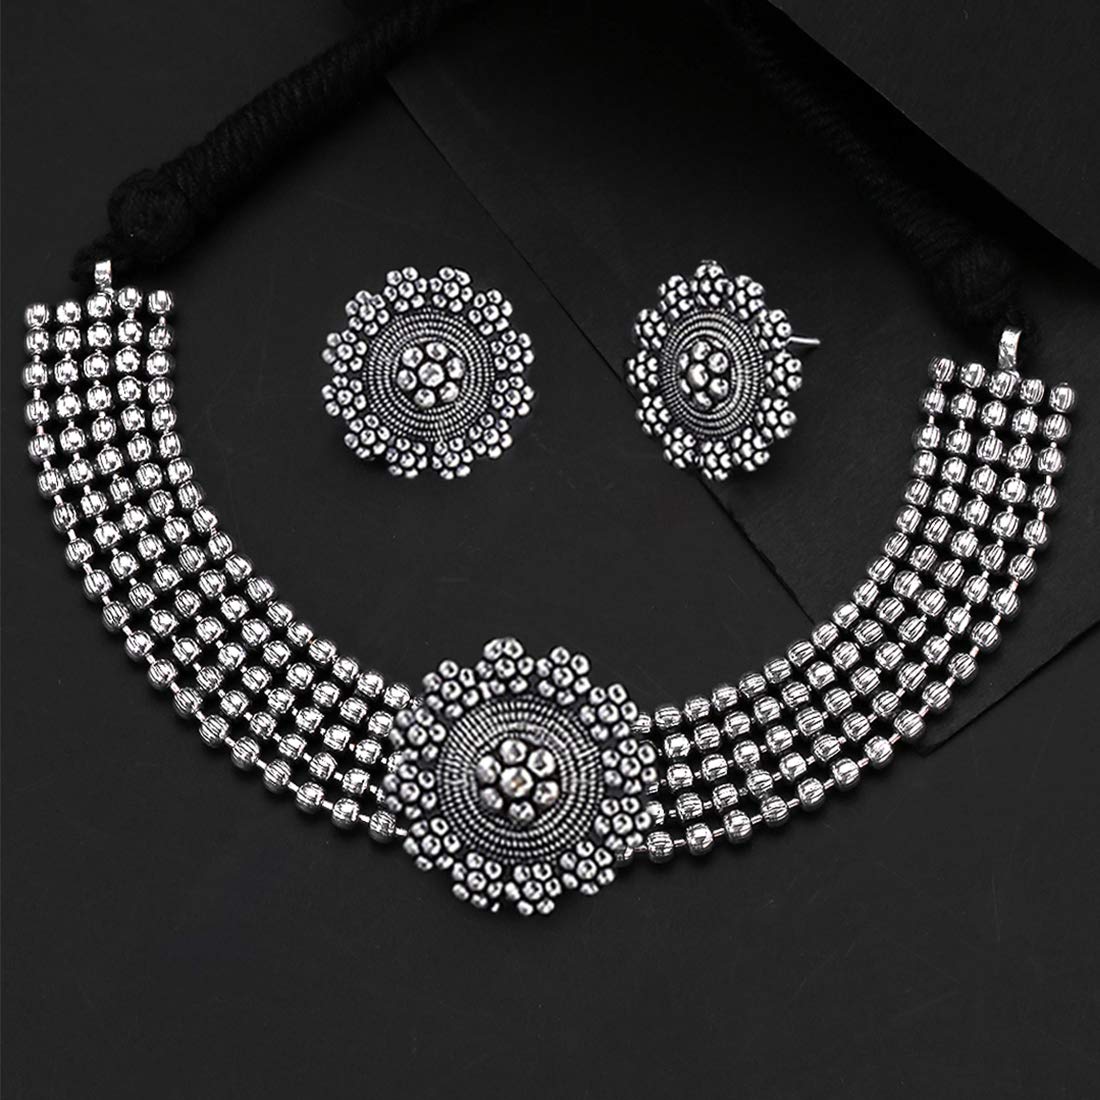 Yellow Chimes Oxidised Silver Threaded Jewelry Beads Traditional Choker Necklace Set for Women and Girls, silver oxidised, medium (YCTJNS-48OXDFLWR-SL)